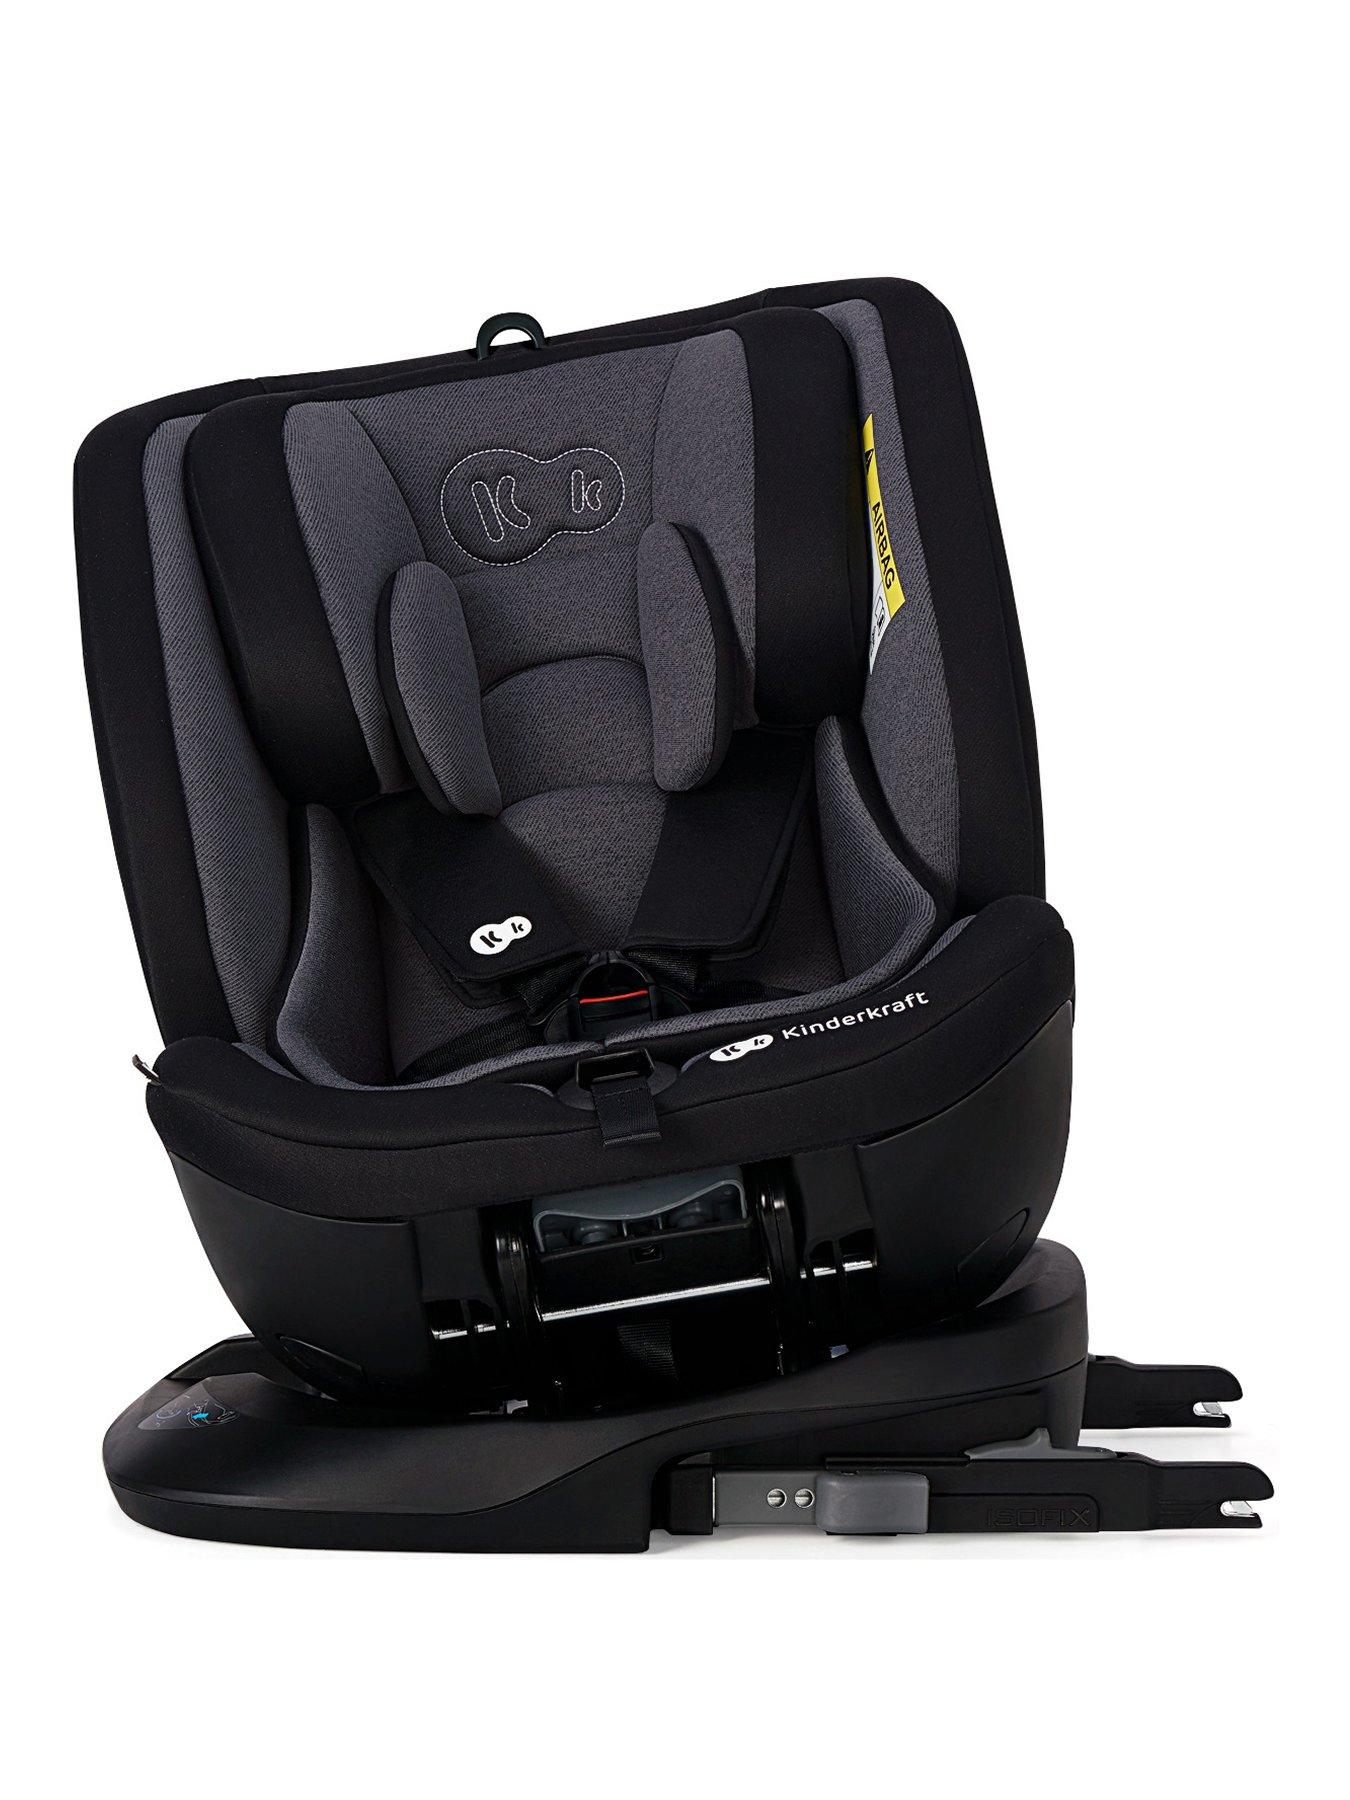 360 Degree Rotation Cushion Car Swivel Seat Chair Pain Relieving Seat Pad  Mobility Aid Moving Part